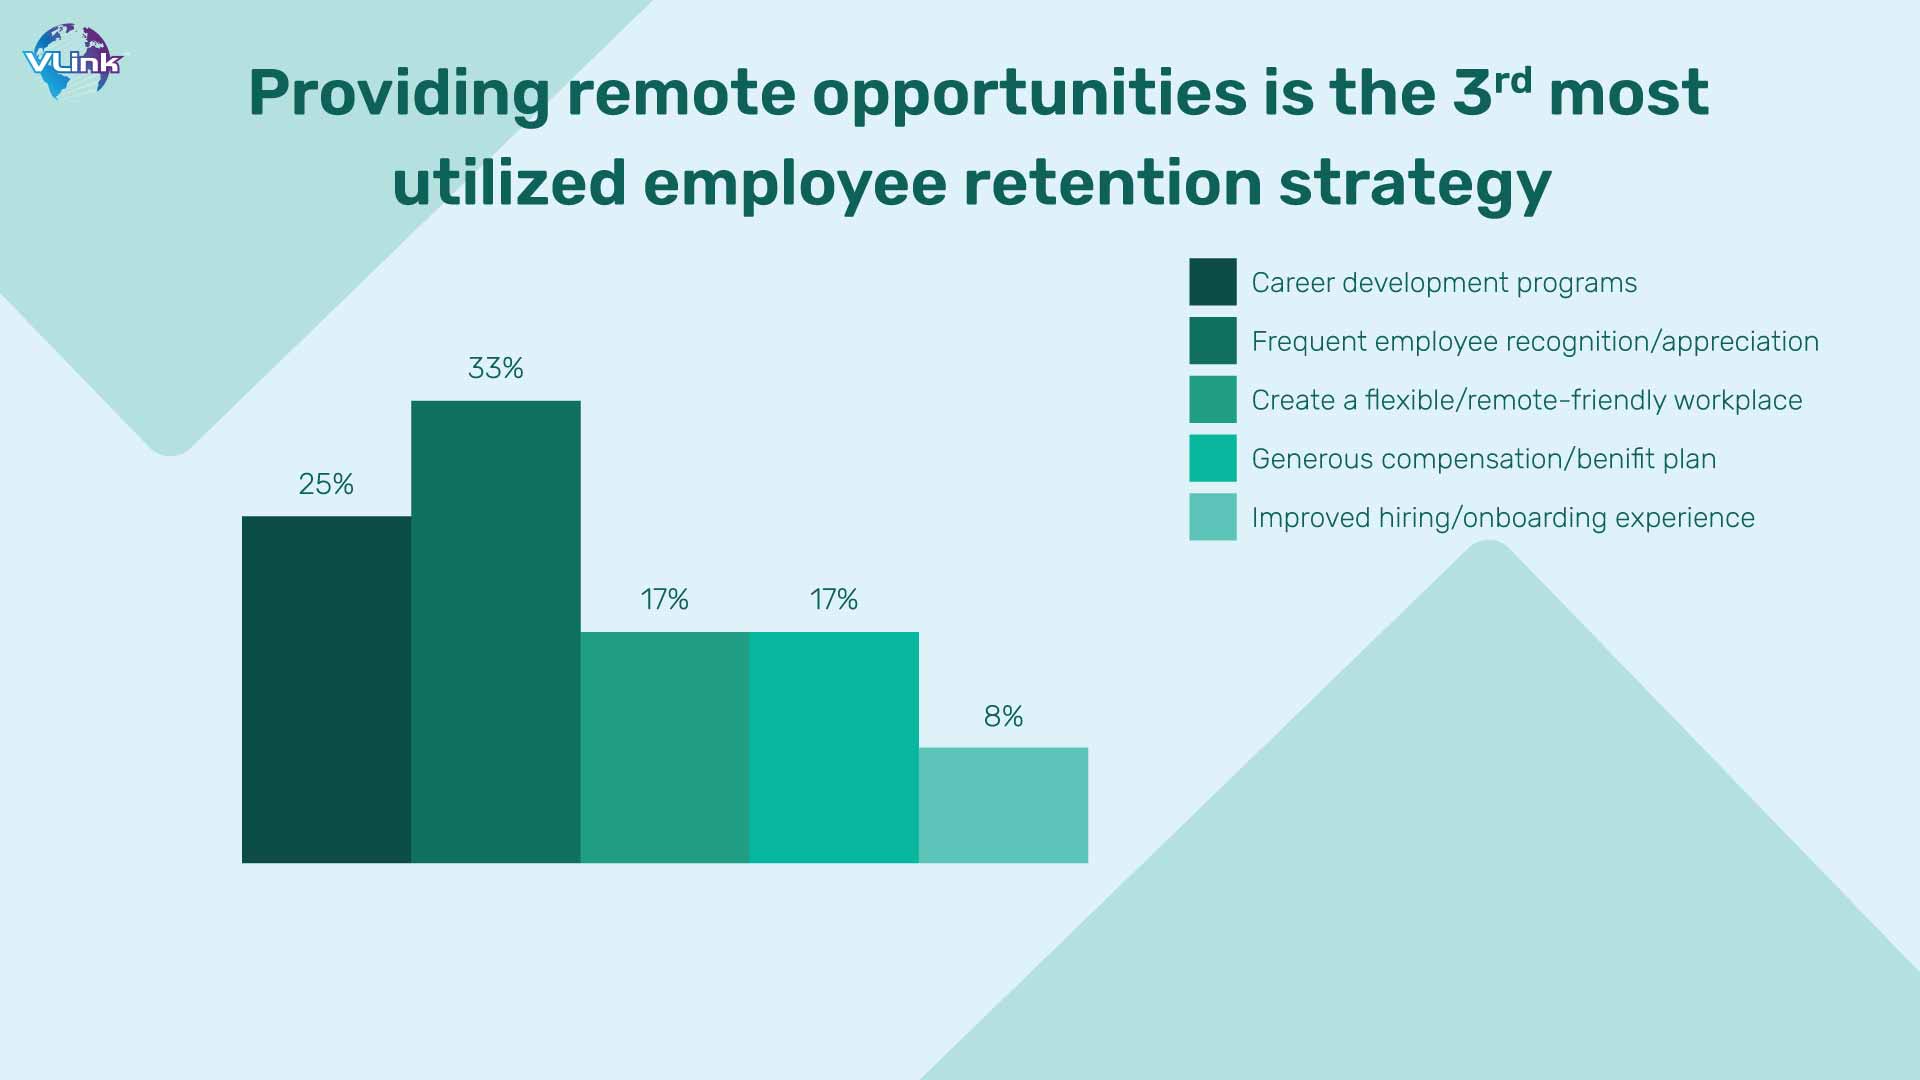 Providing remote opportunities is the 3rd most utilized employee retention strategy